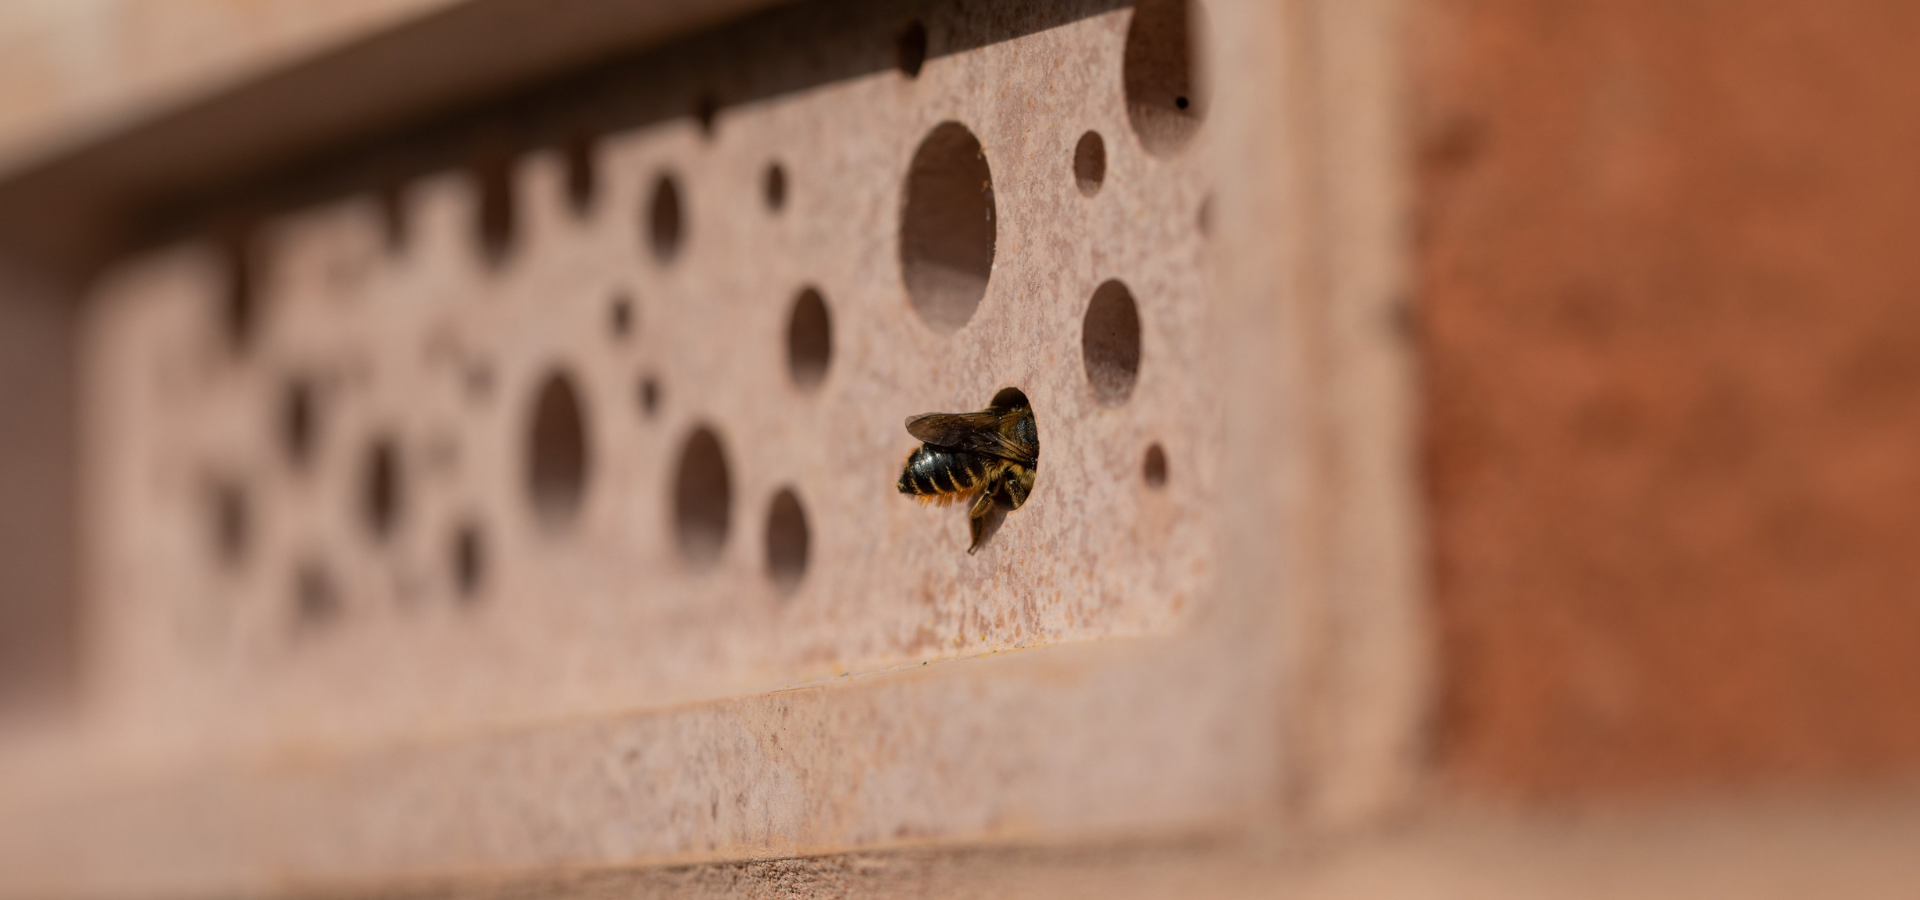 Bee Brick bee house for solitary bees installed in a brick wall